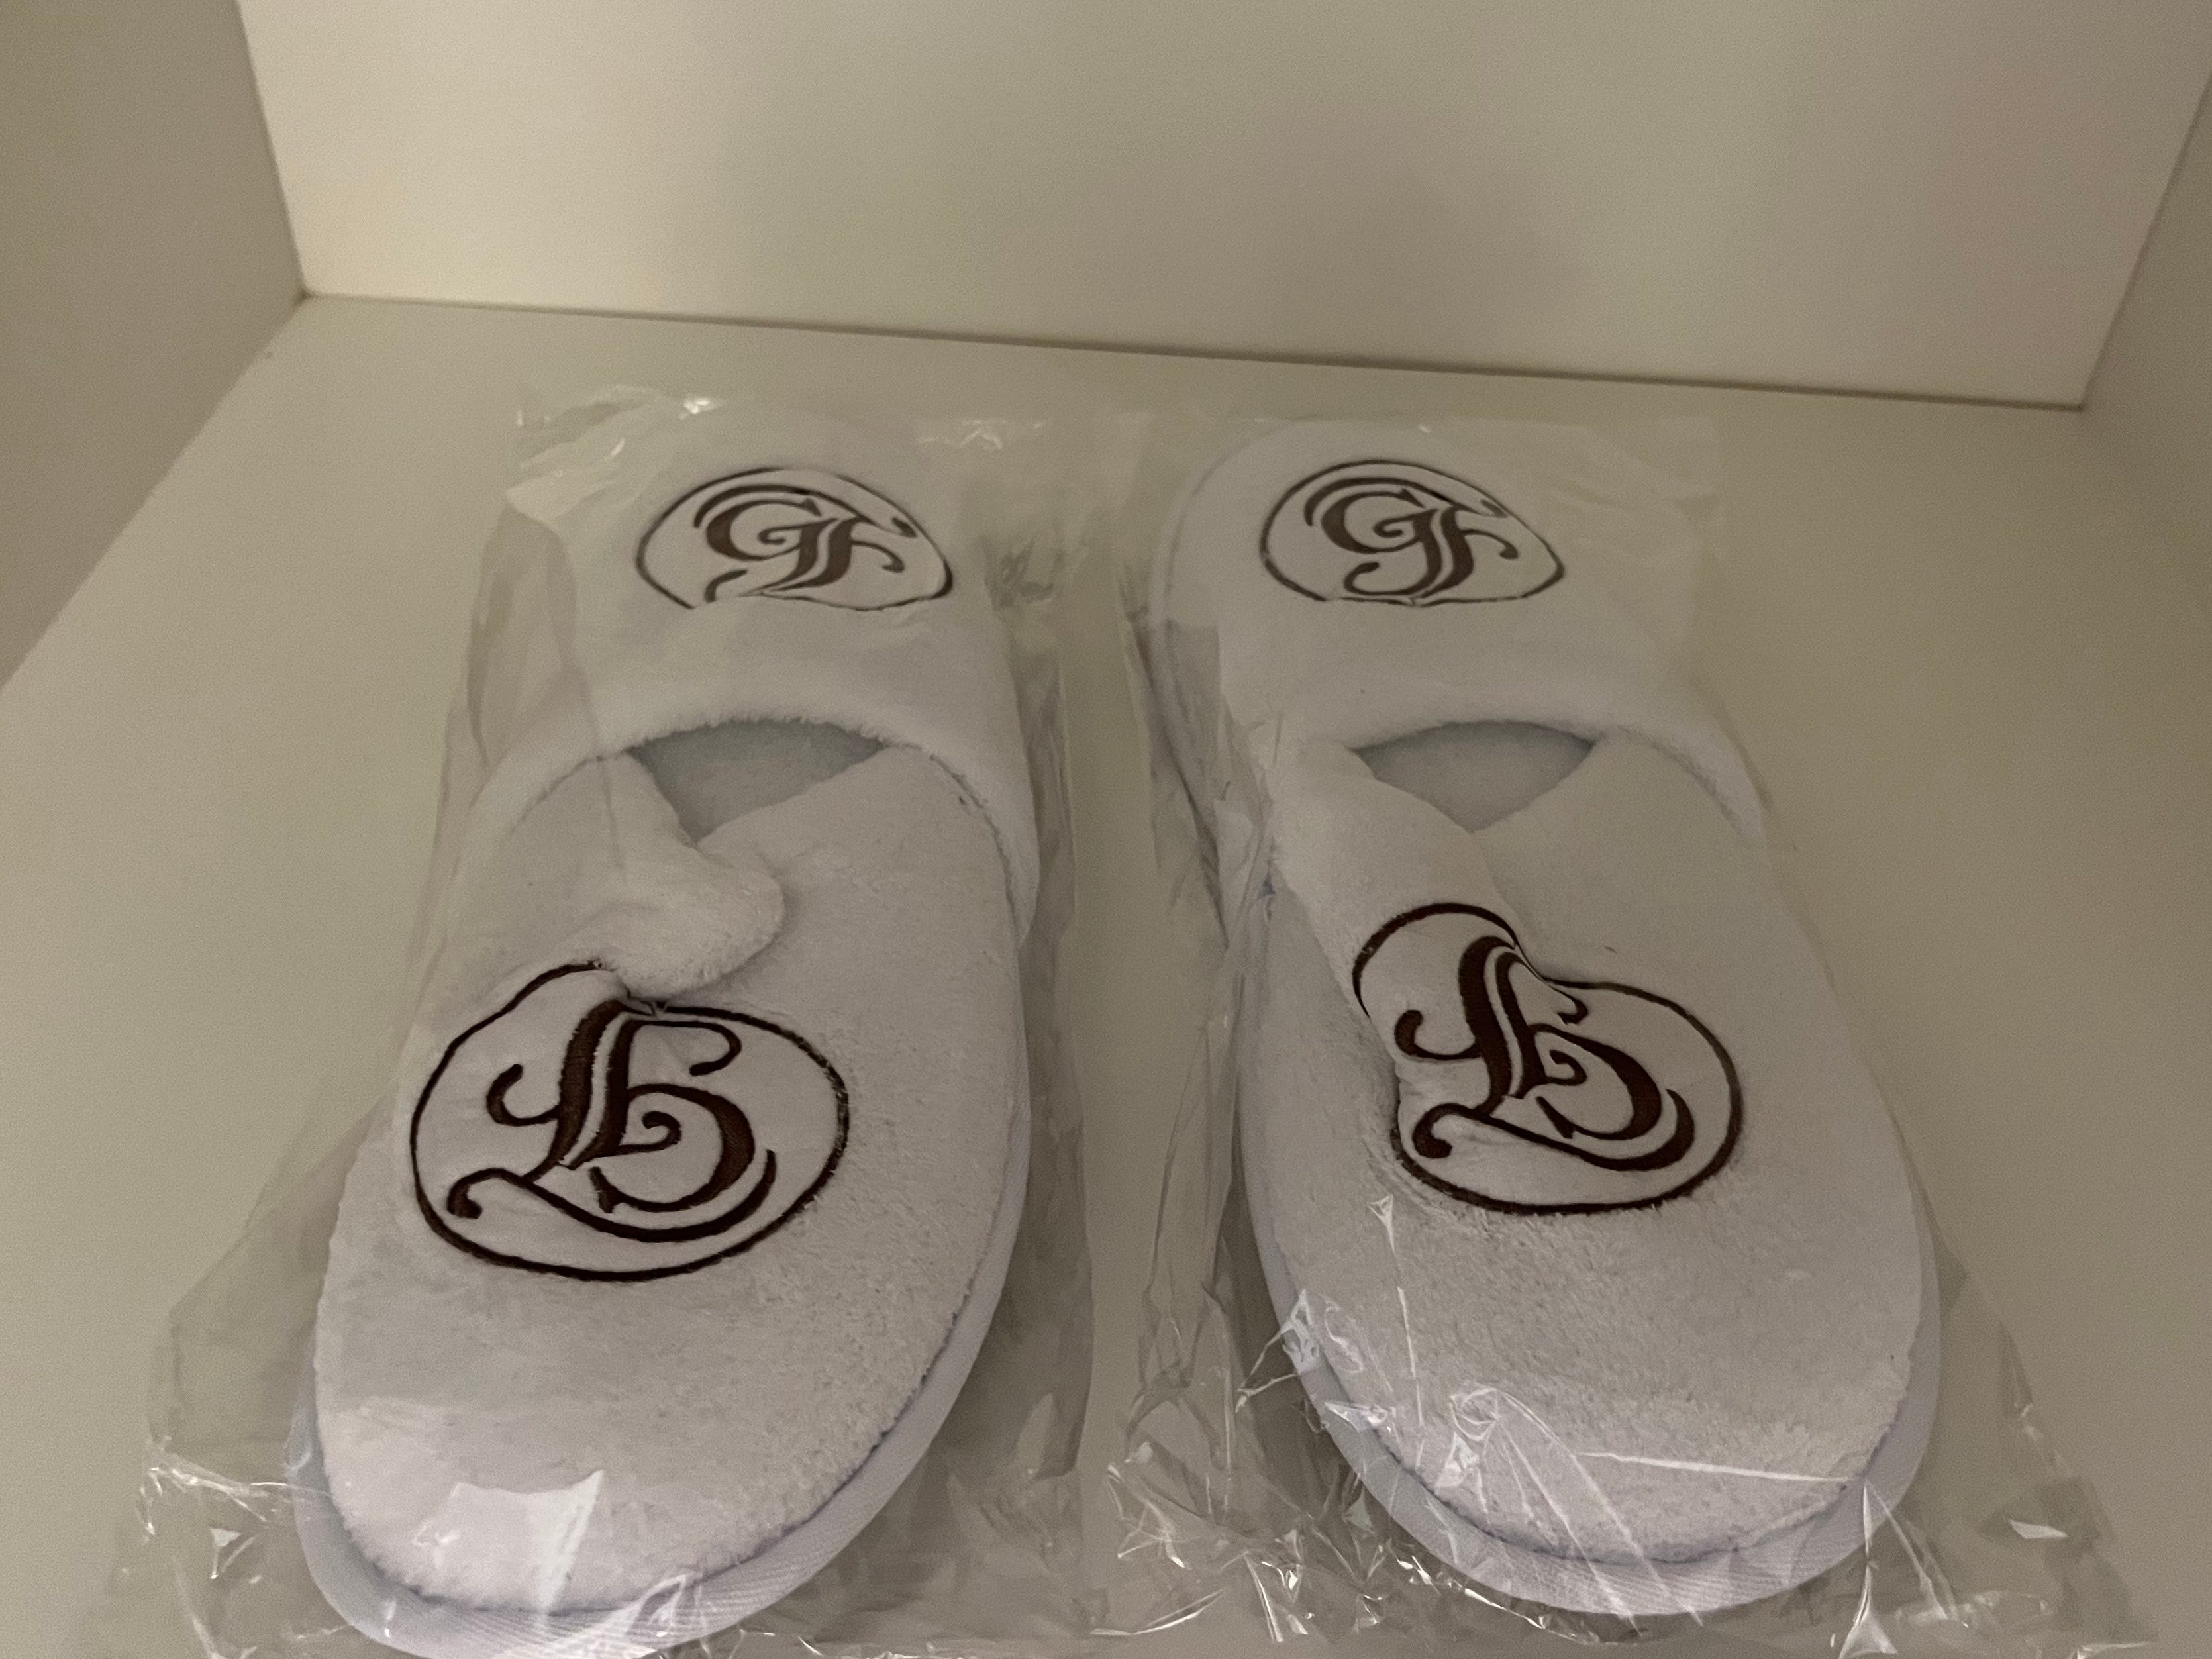 <p>This is the only Disney World hotel I've stayed at where I've seen complimentary slippers.</p><p>Although they were just lightweight spa slippers, they were comfortable to wear when walking around the room and after taking a shower. </p><p>I decided not to try on the matching robe, but it was super beautiful to look at.</p>